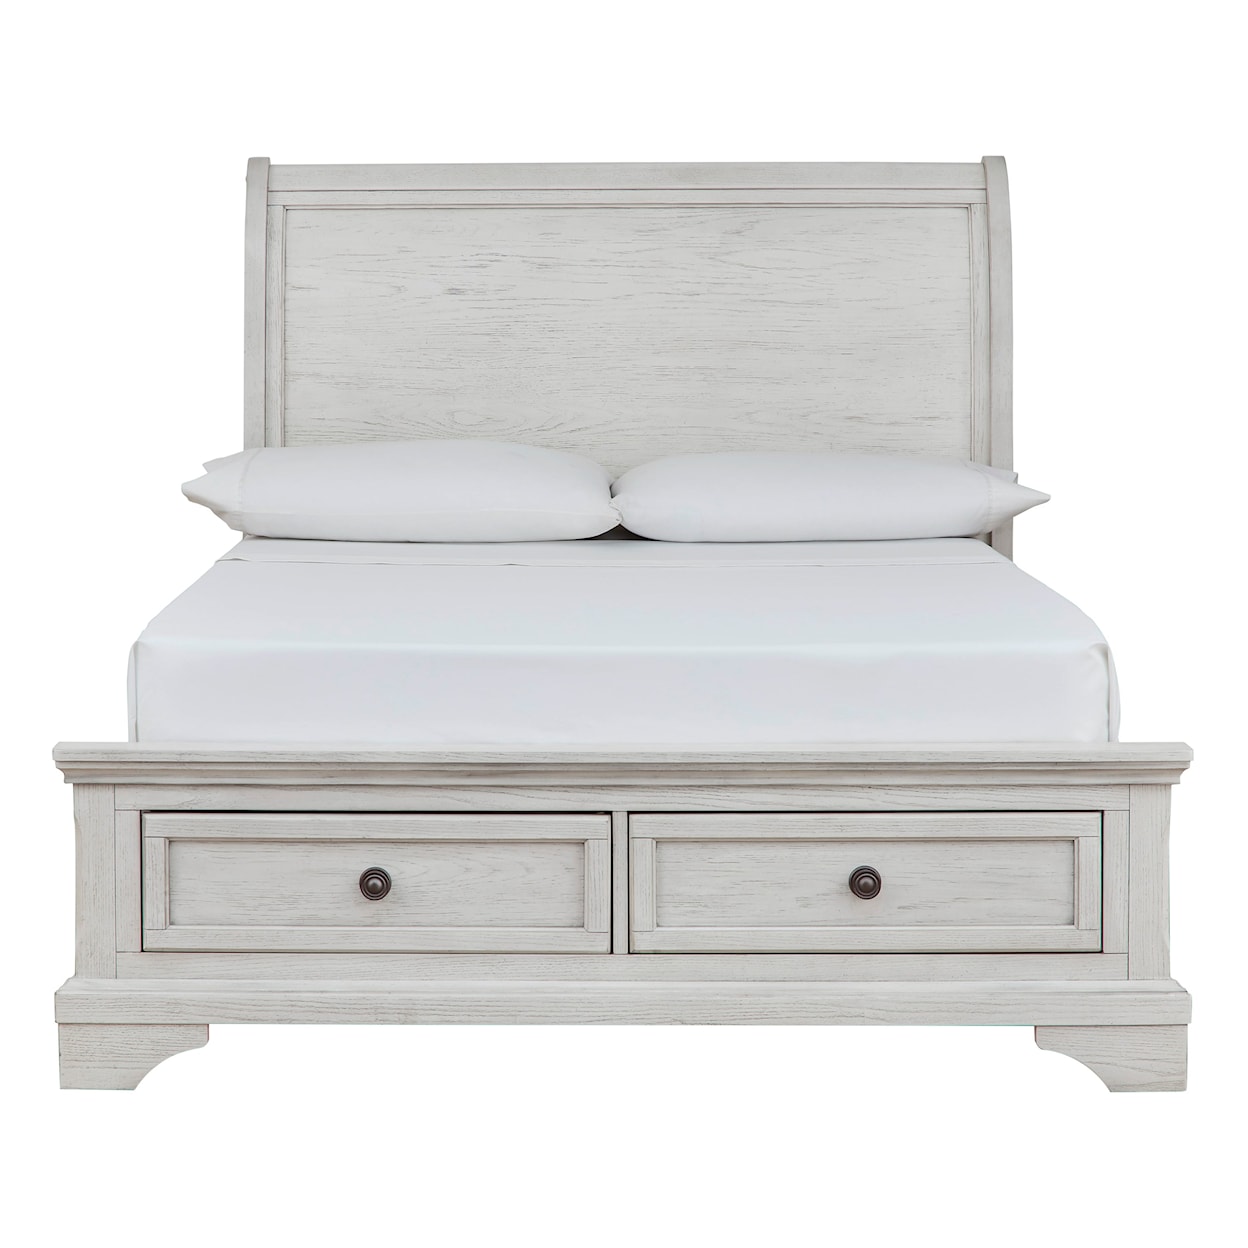 Michael Alan Select Robbinsdale Full Sleigh Bed with Storage